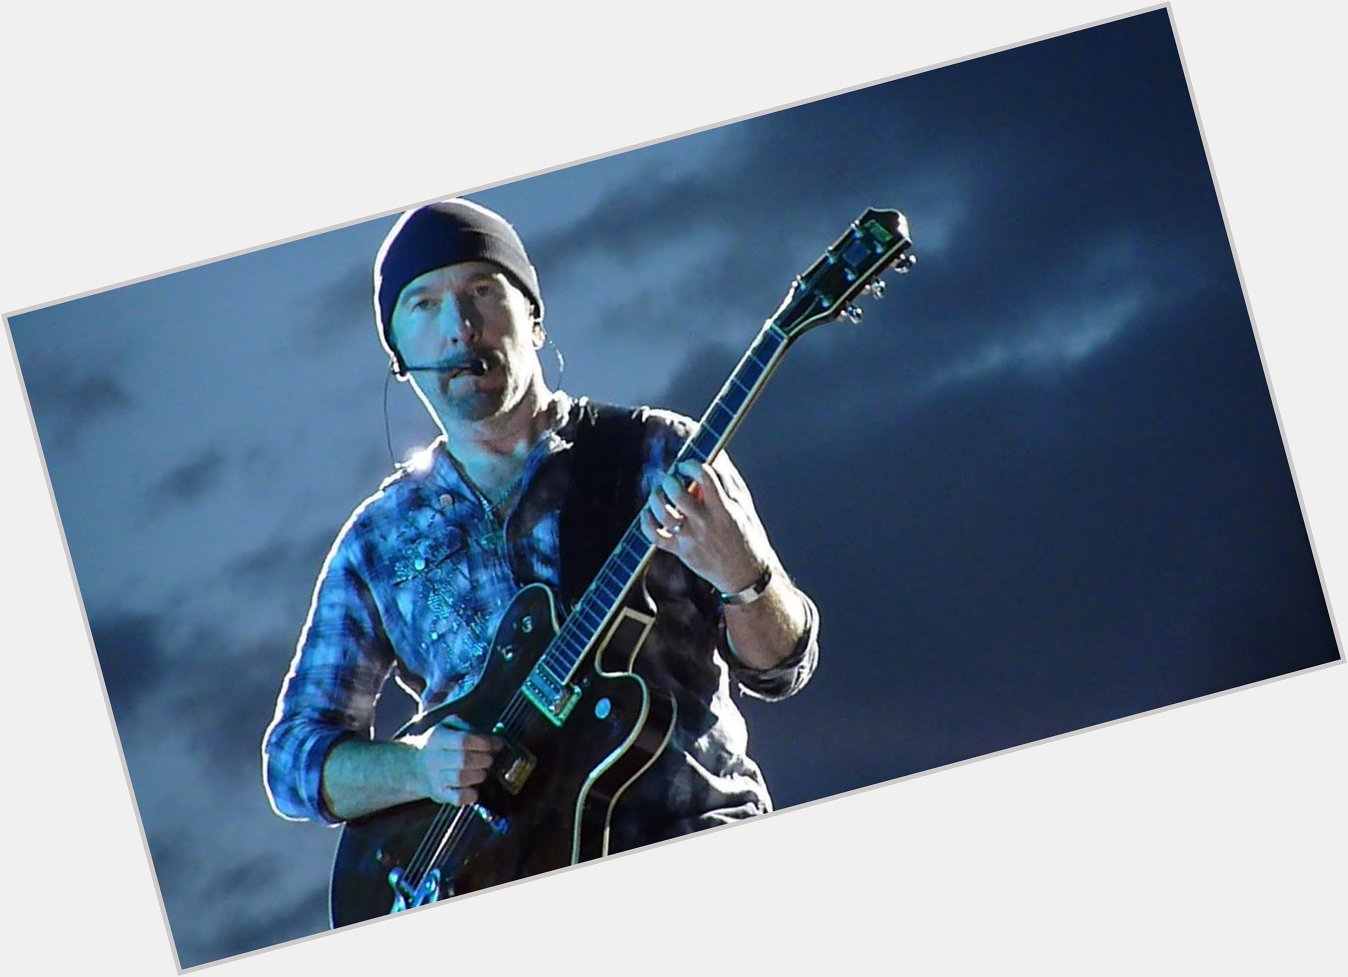 Happy birthday to The Edge, born on 8th Aug 1961, guitarist, singer, songwriter with U2,  